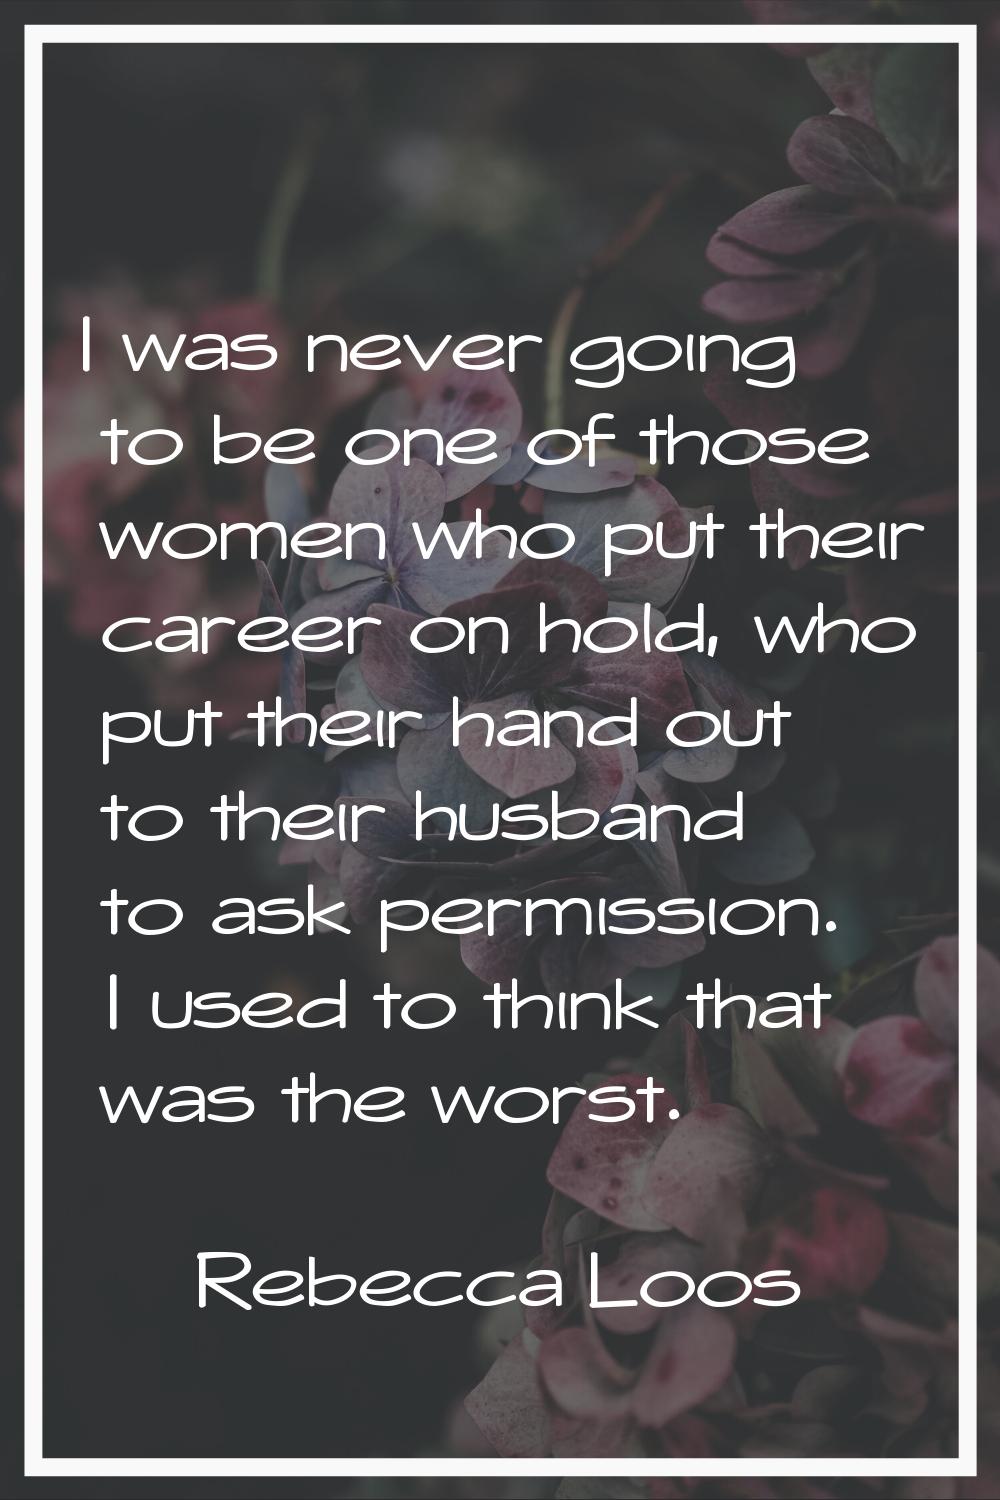 I was never going to be one of those women who put their career on hold, who put their hand out to 